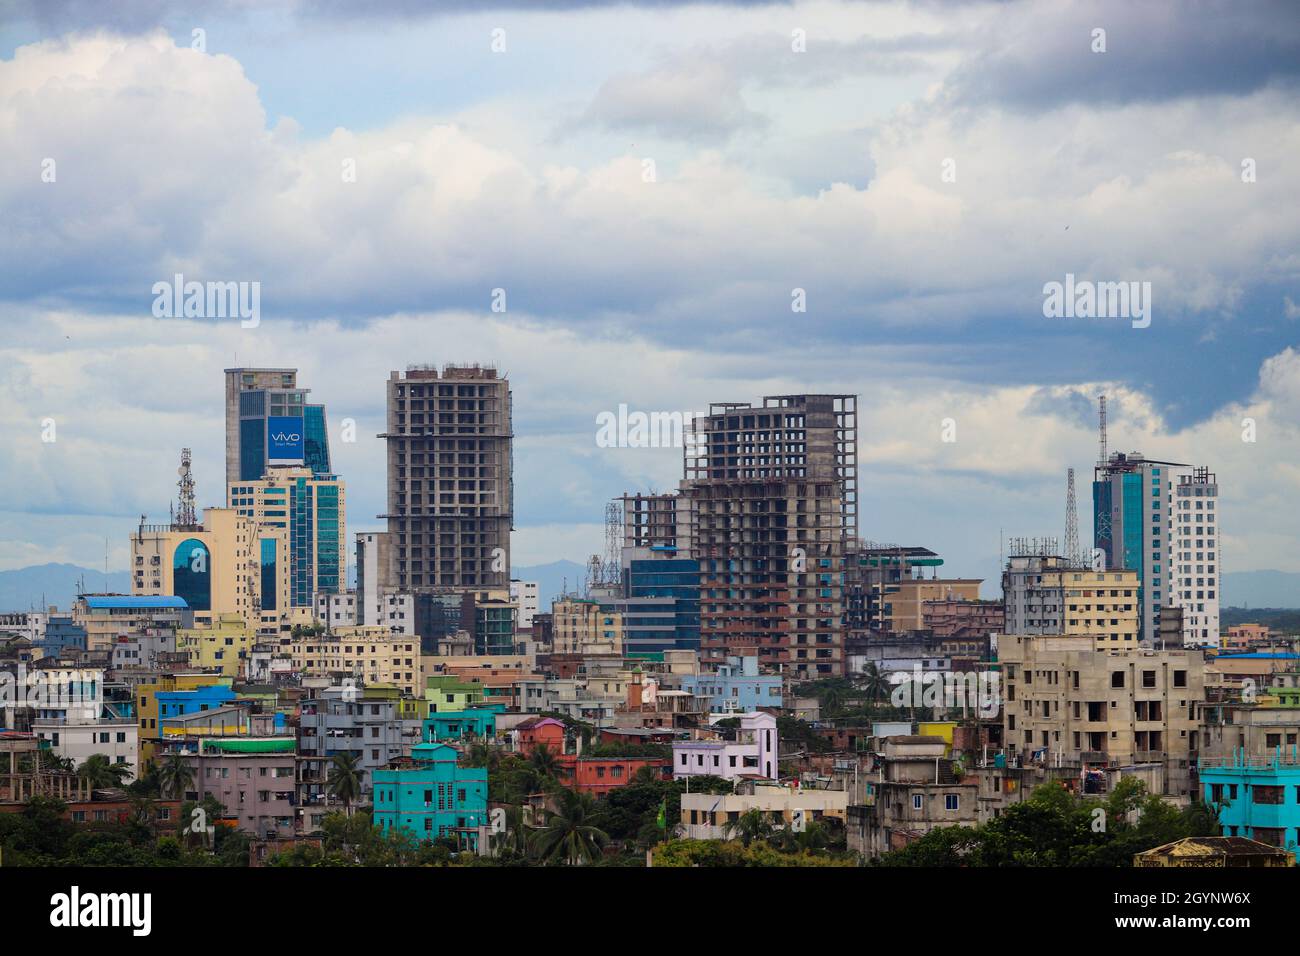 Skyline of Chittagong with cloudy sky and green trees. Agrabad, Chittagong, Bangladesh Stock Photo